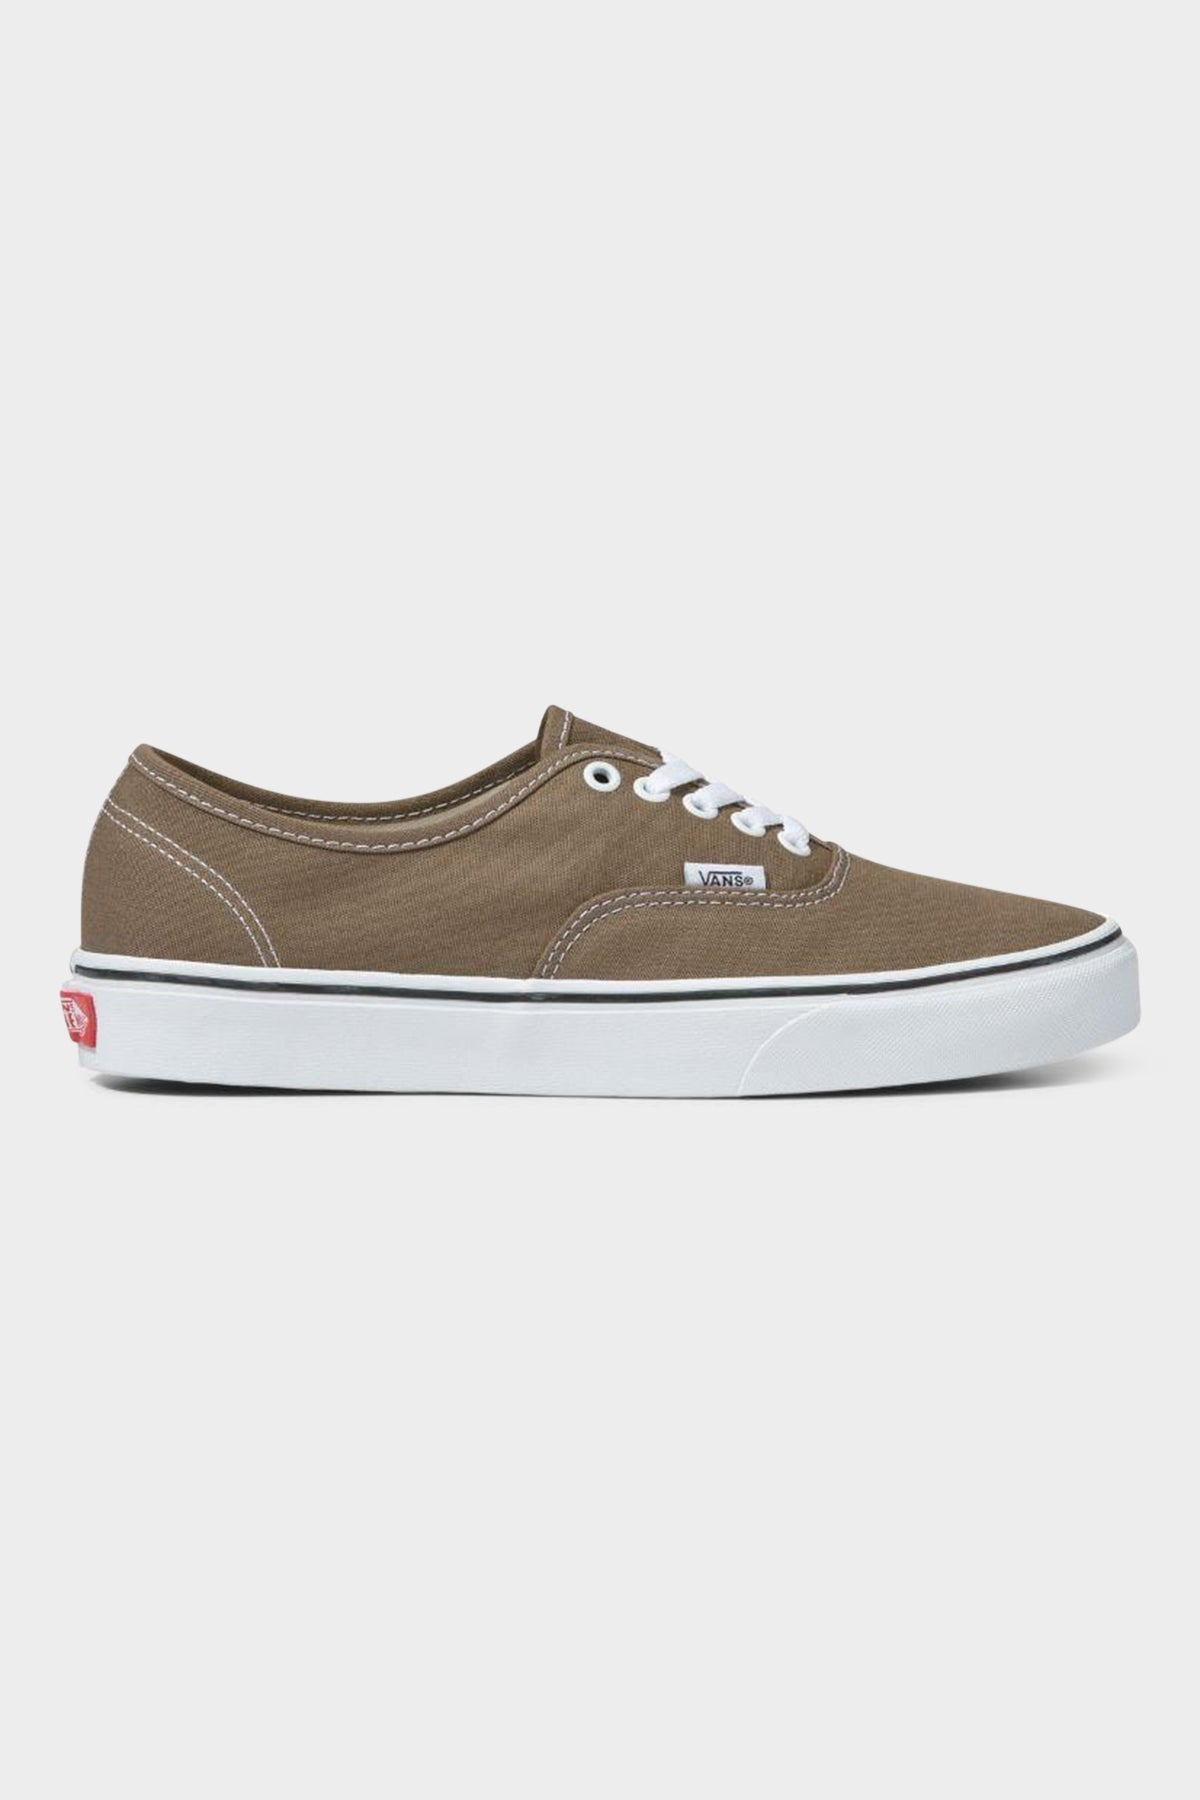 Vans Authentic Color Theory Walnut